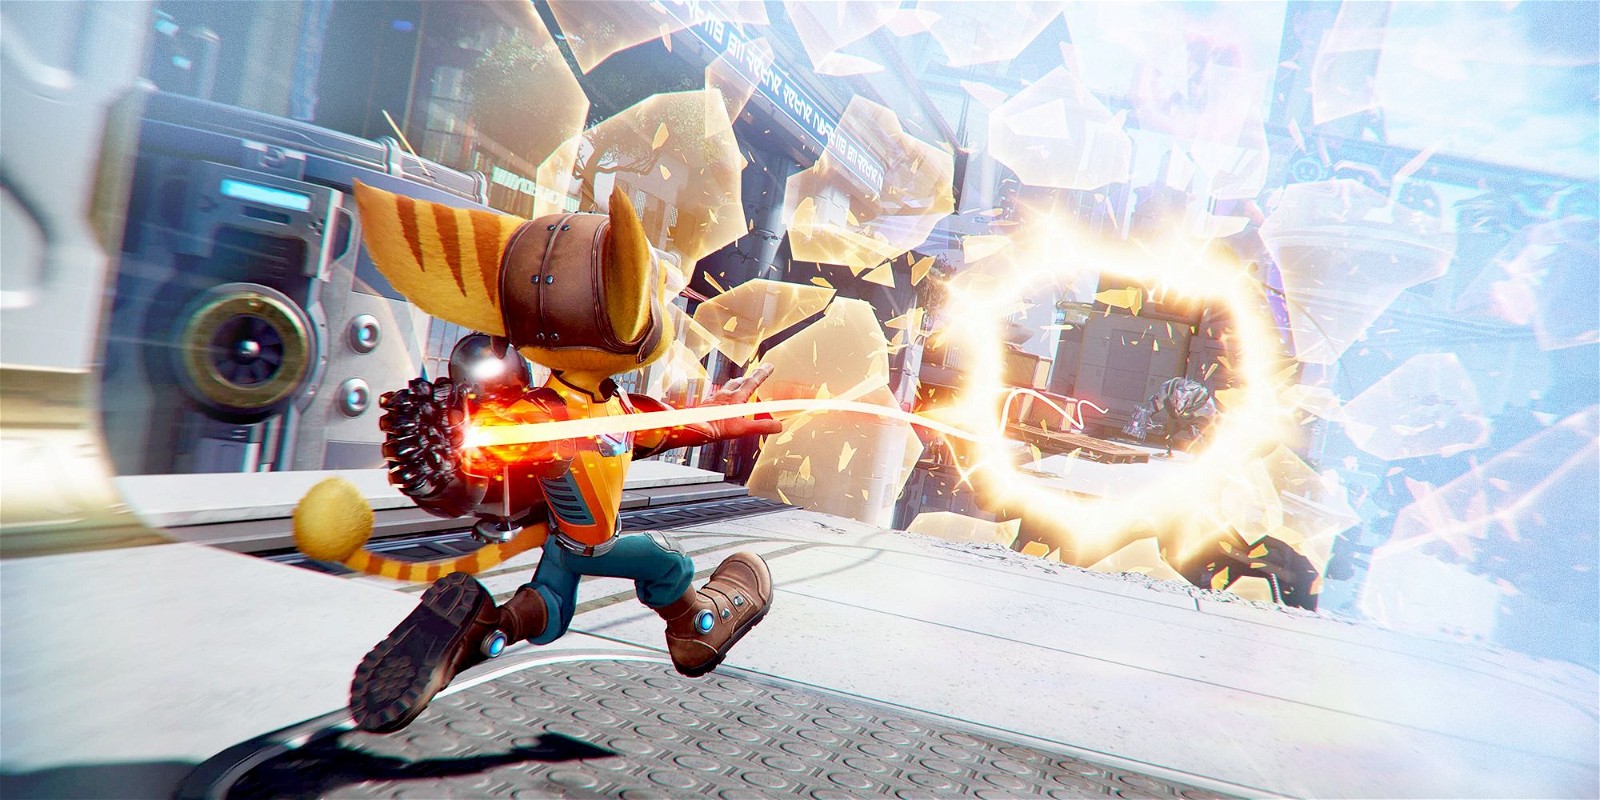 Recent tests show Ratchet & Clank can be played on systems other than the PS5.